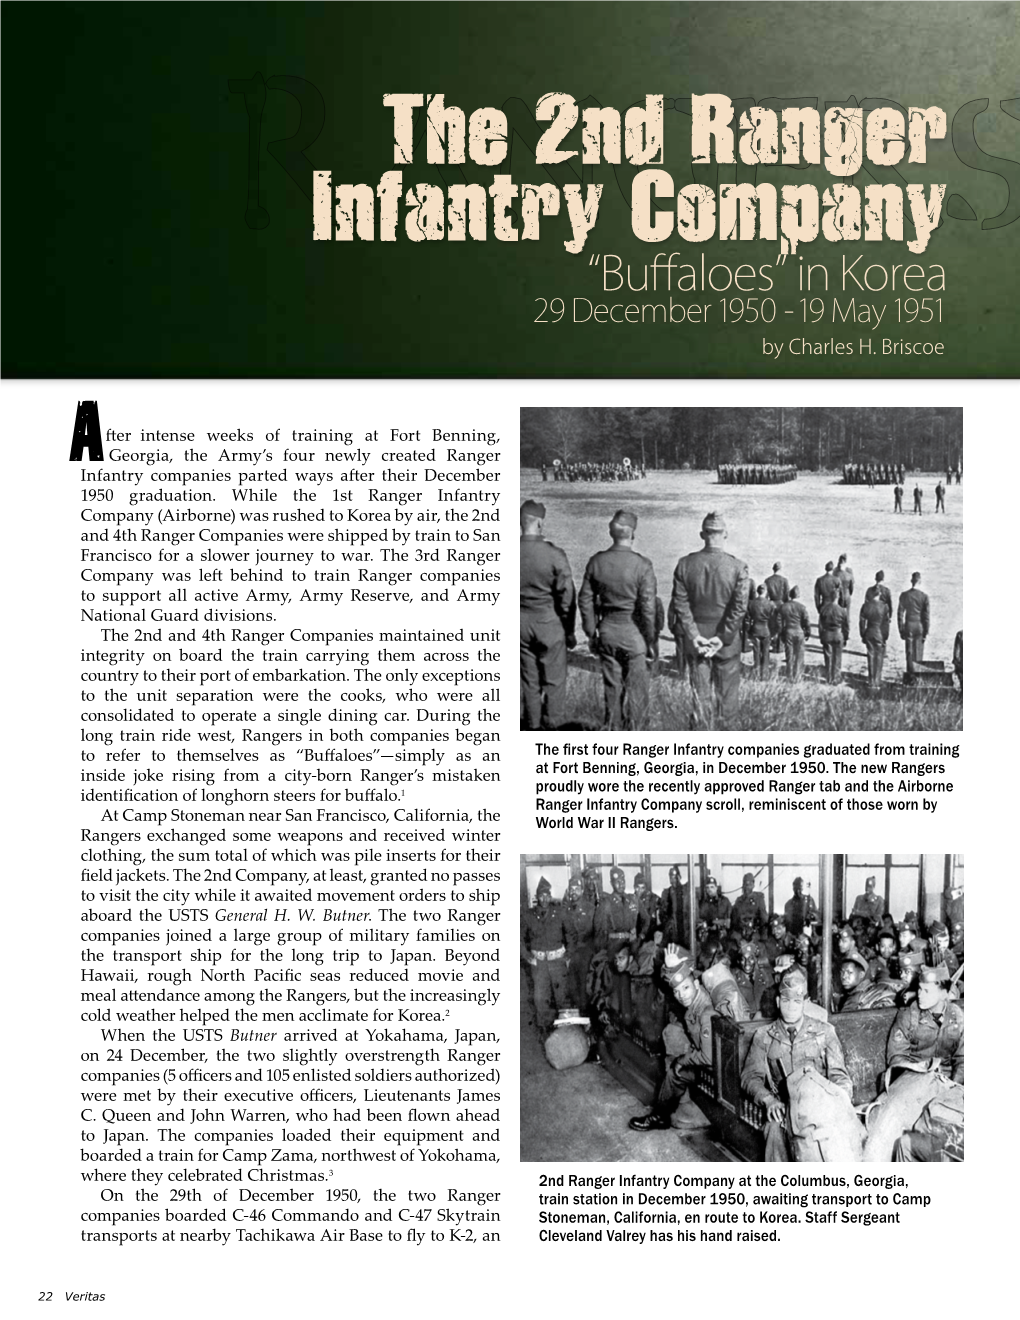 The 2Nd Ranger Infantry Company